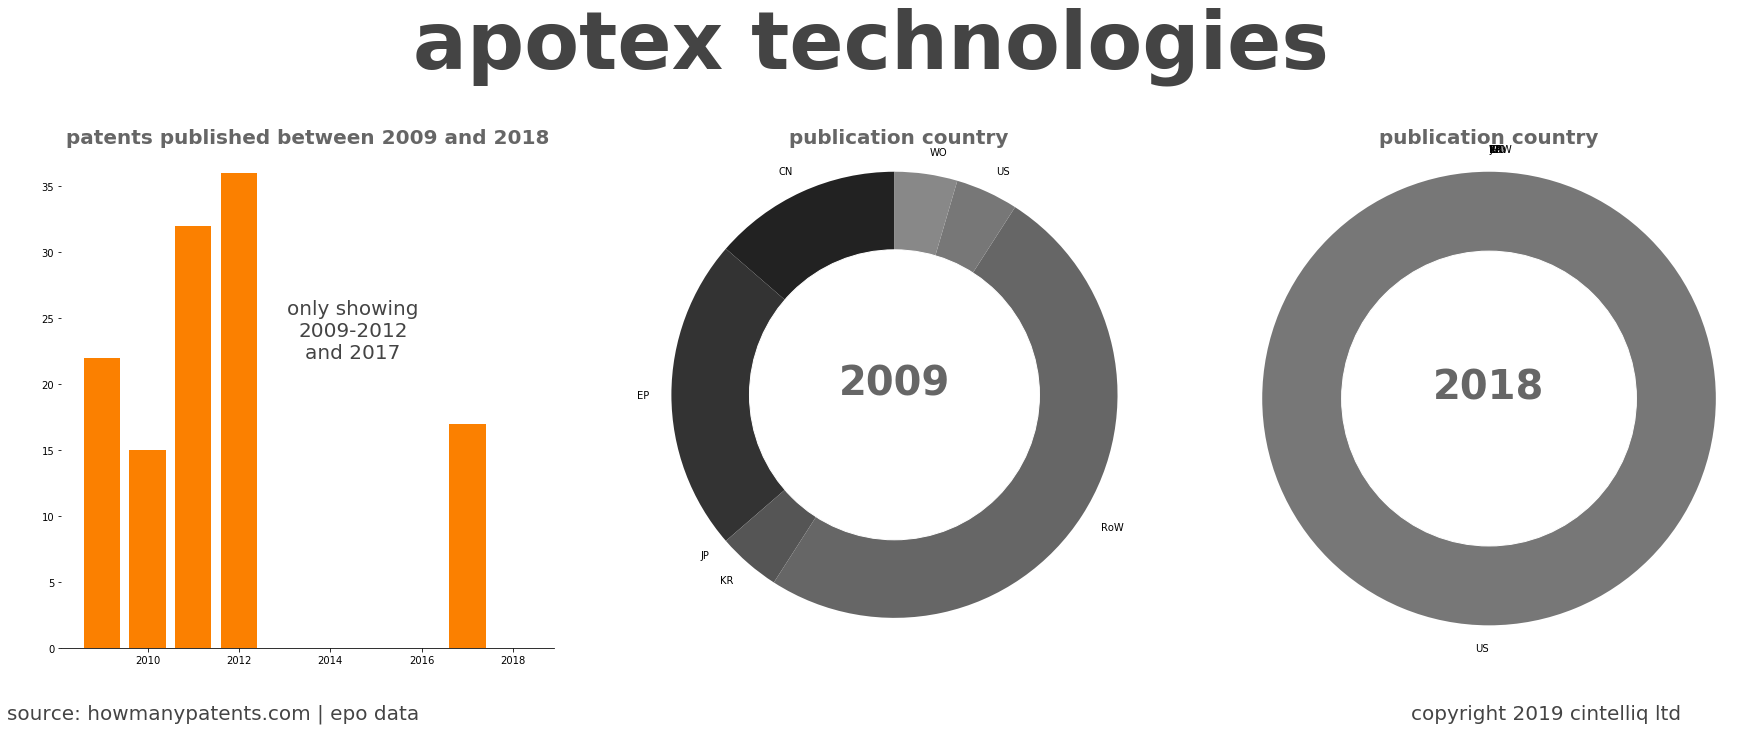 summary of patents for Apotex Technologies